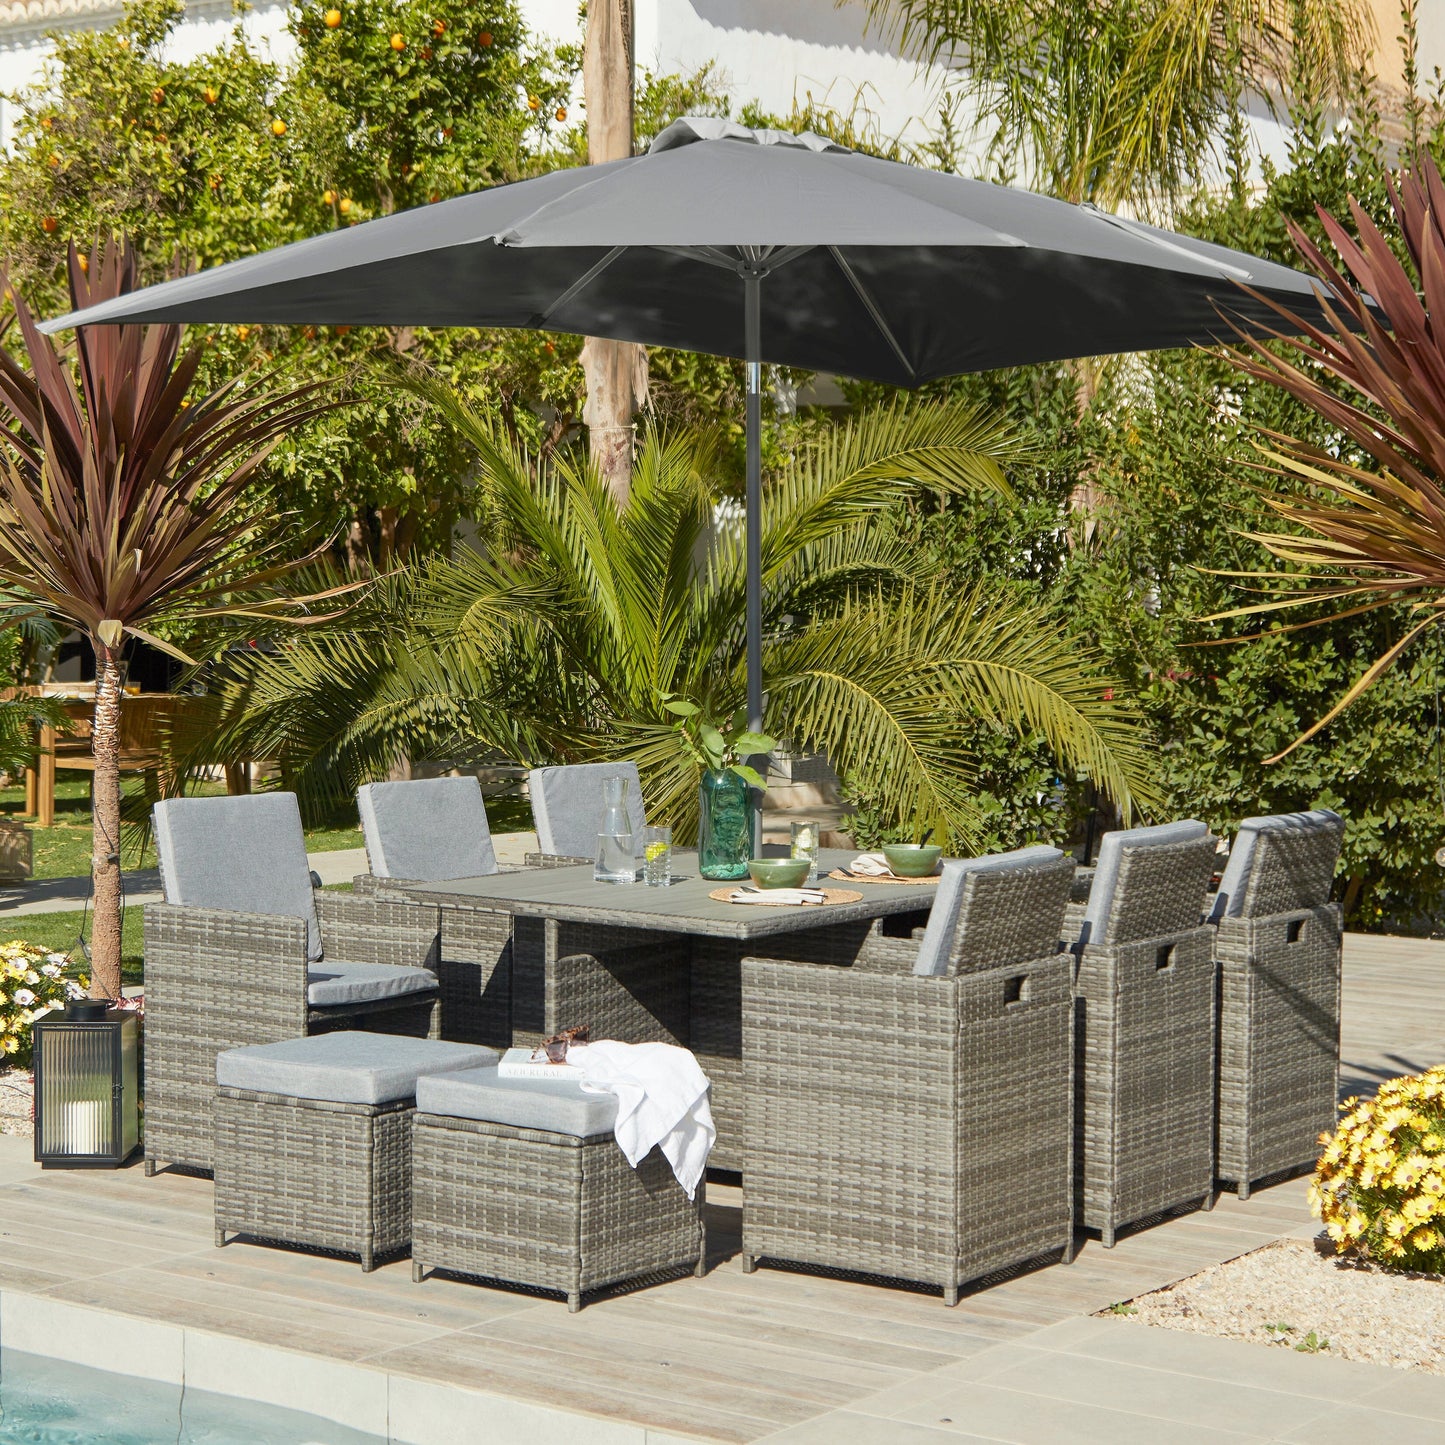 10 Seater Rattan Cube Outdoor Dining Set with Grey LED Premium Parasol - Grey Weave Polywood Top